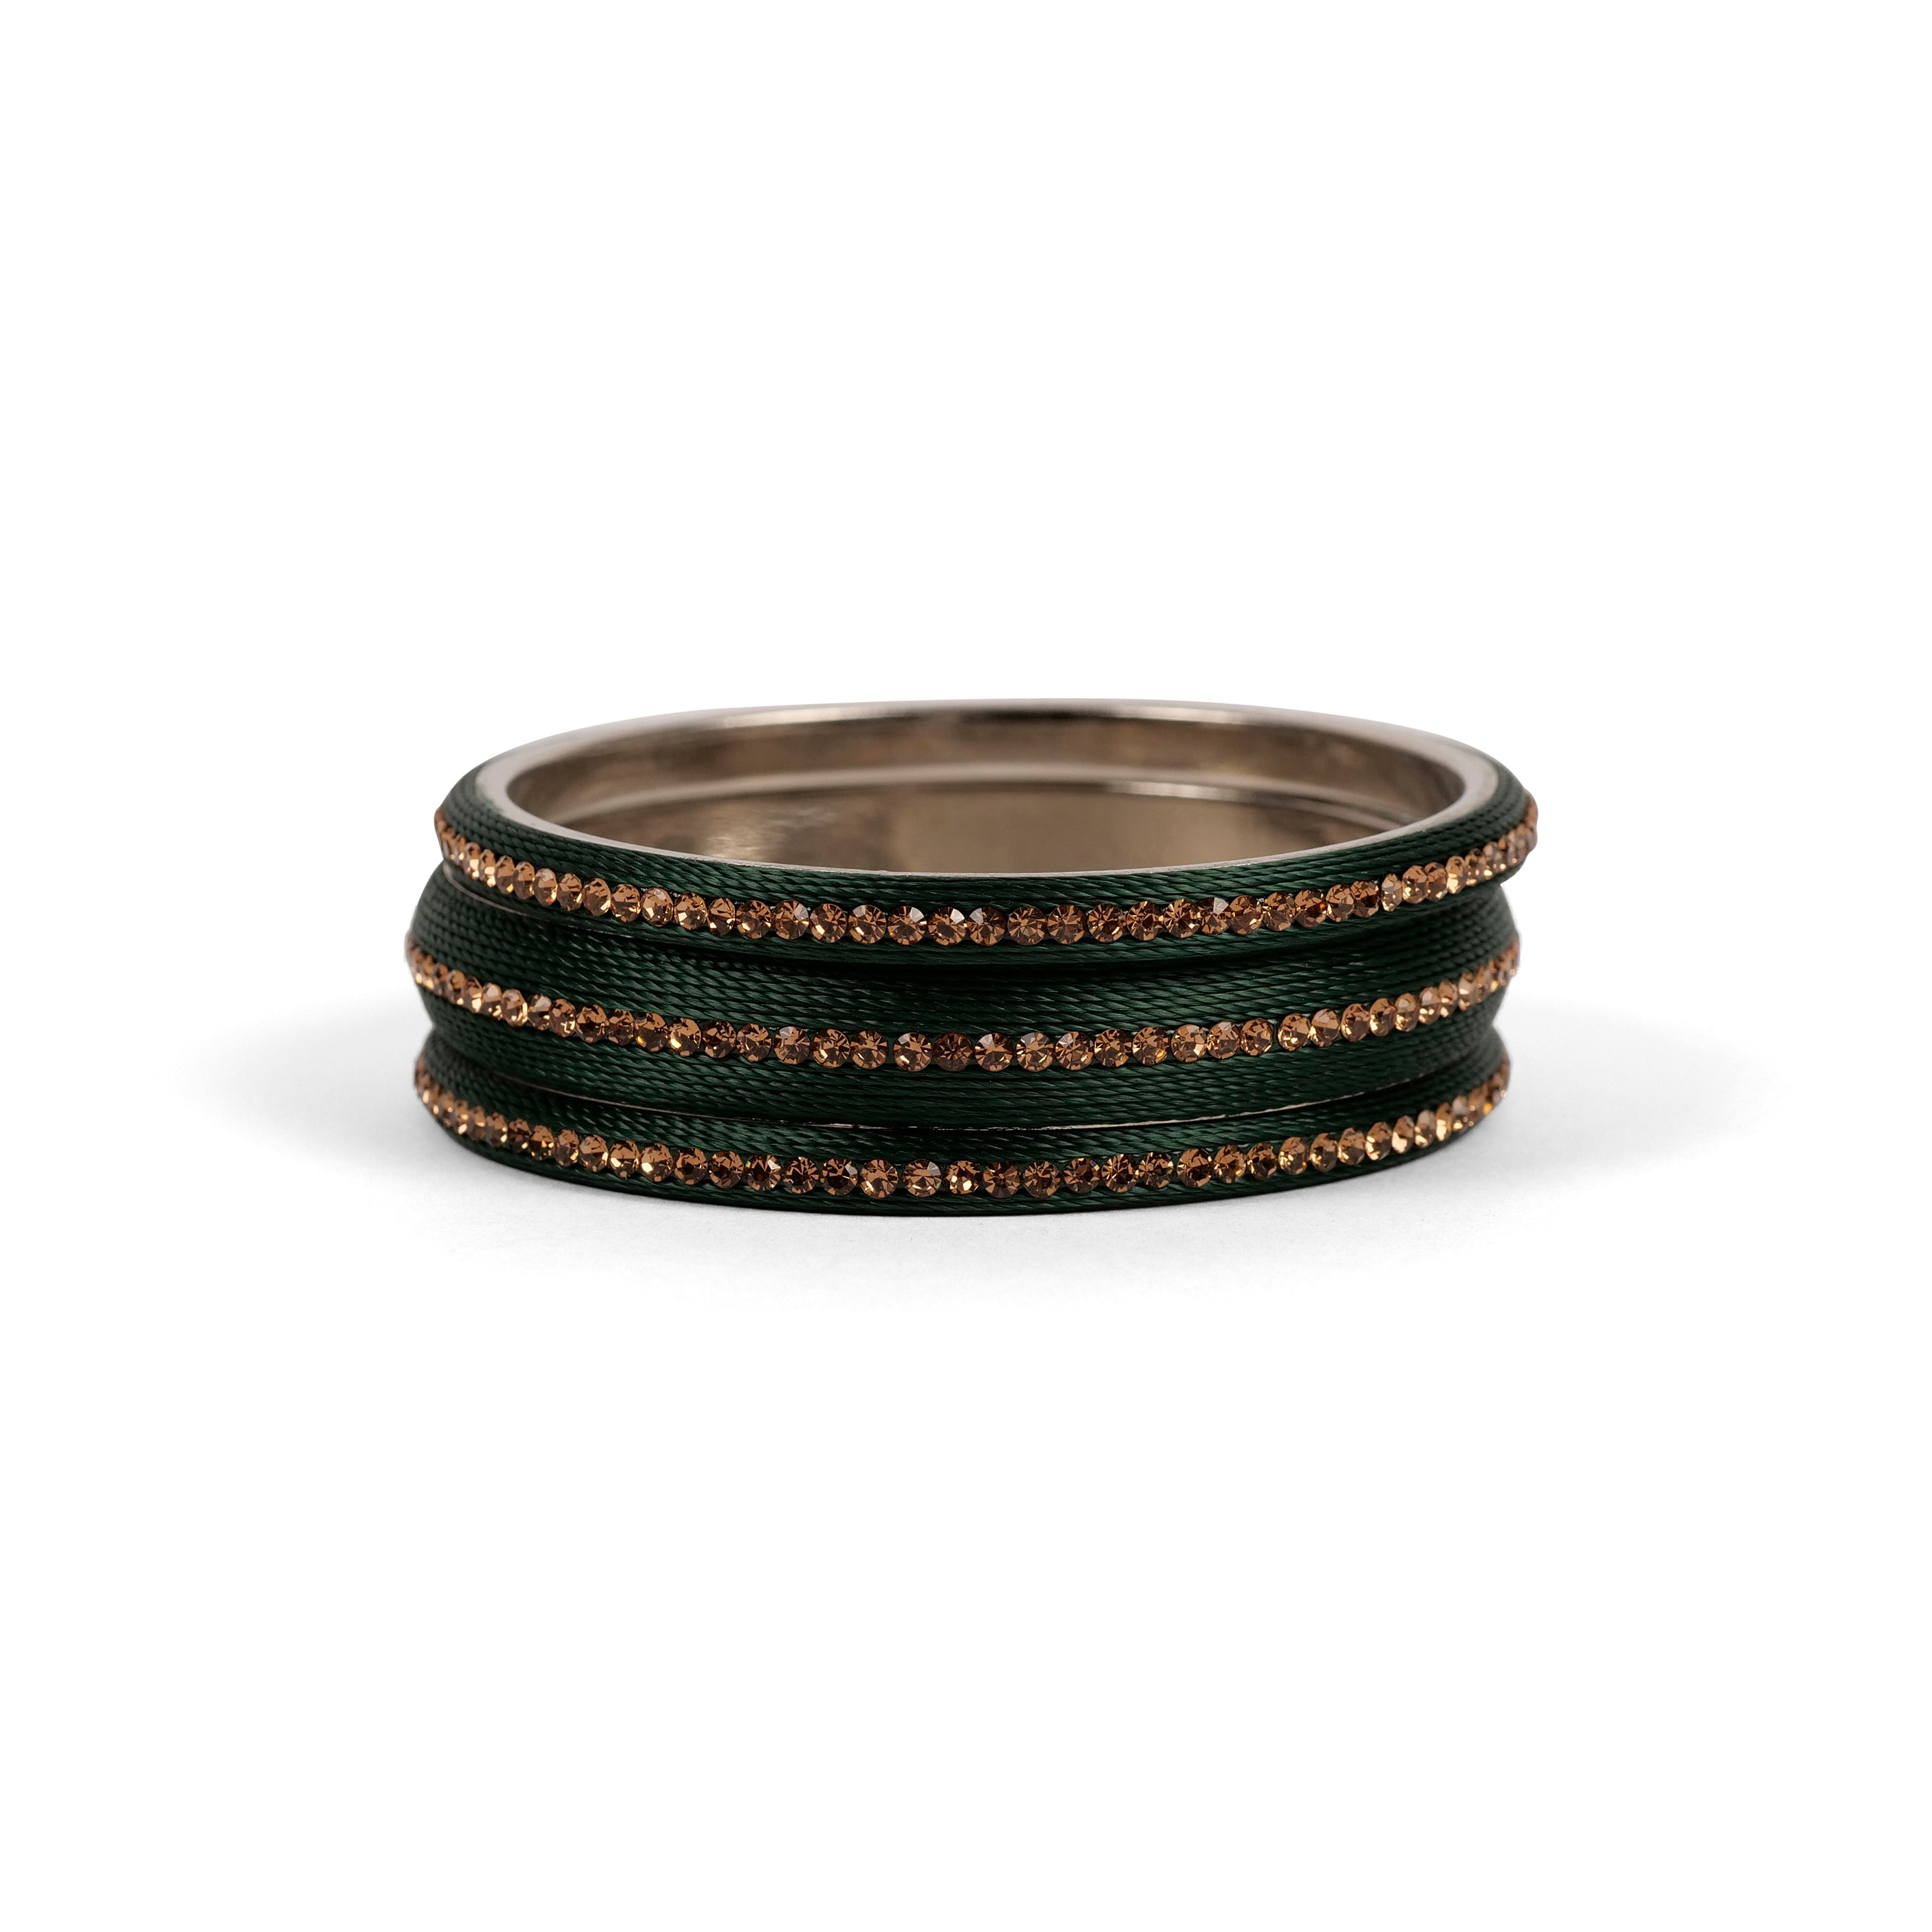 Set of 3 Thread Bangles in Green